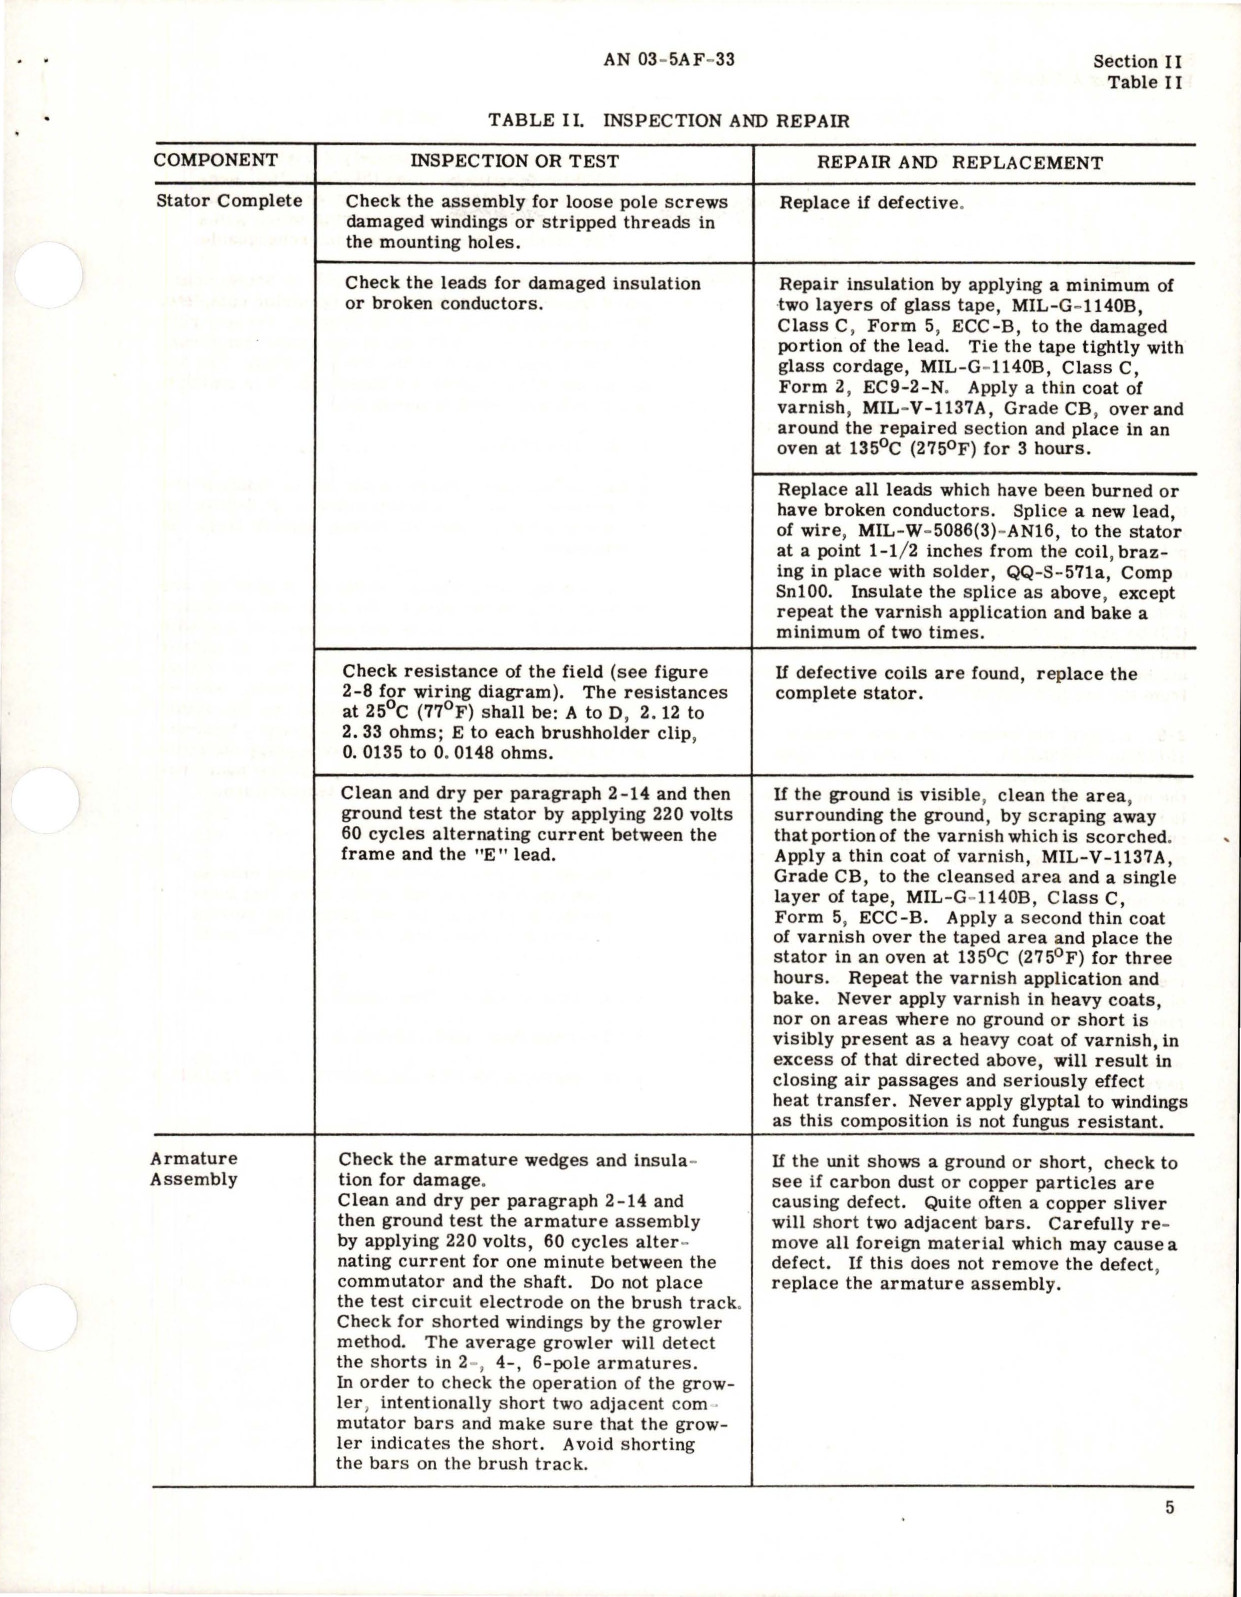 Sample page 7 from AirCorps Library document: Overhaul Instructions for DC Generator - Parts A28A8584-1, AN 3633-1, A35A9103, and A45J247